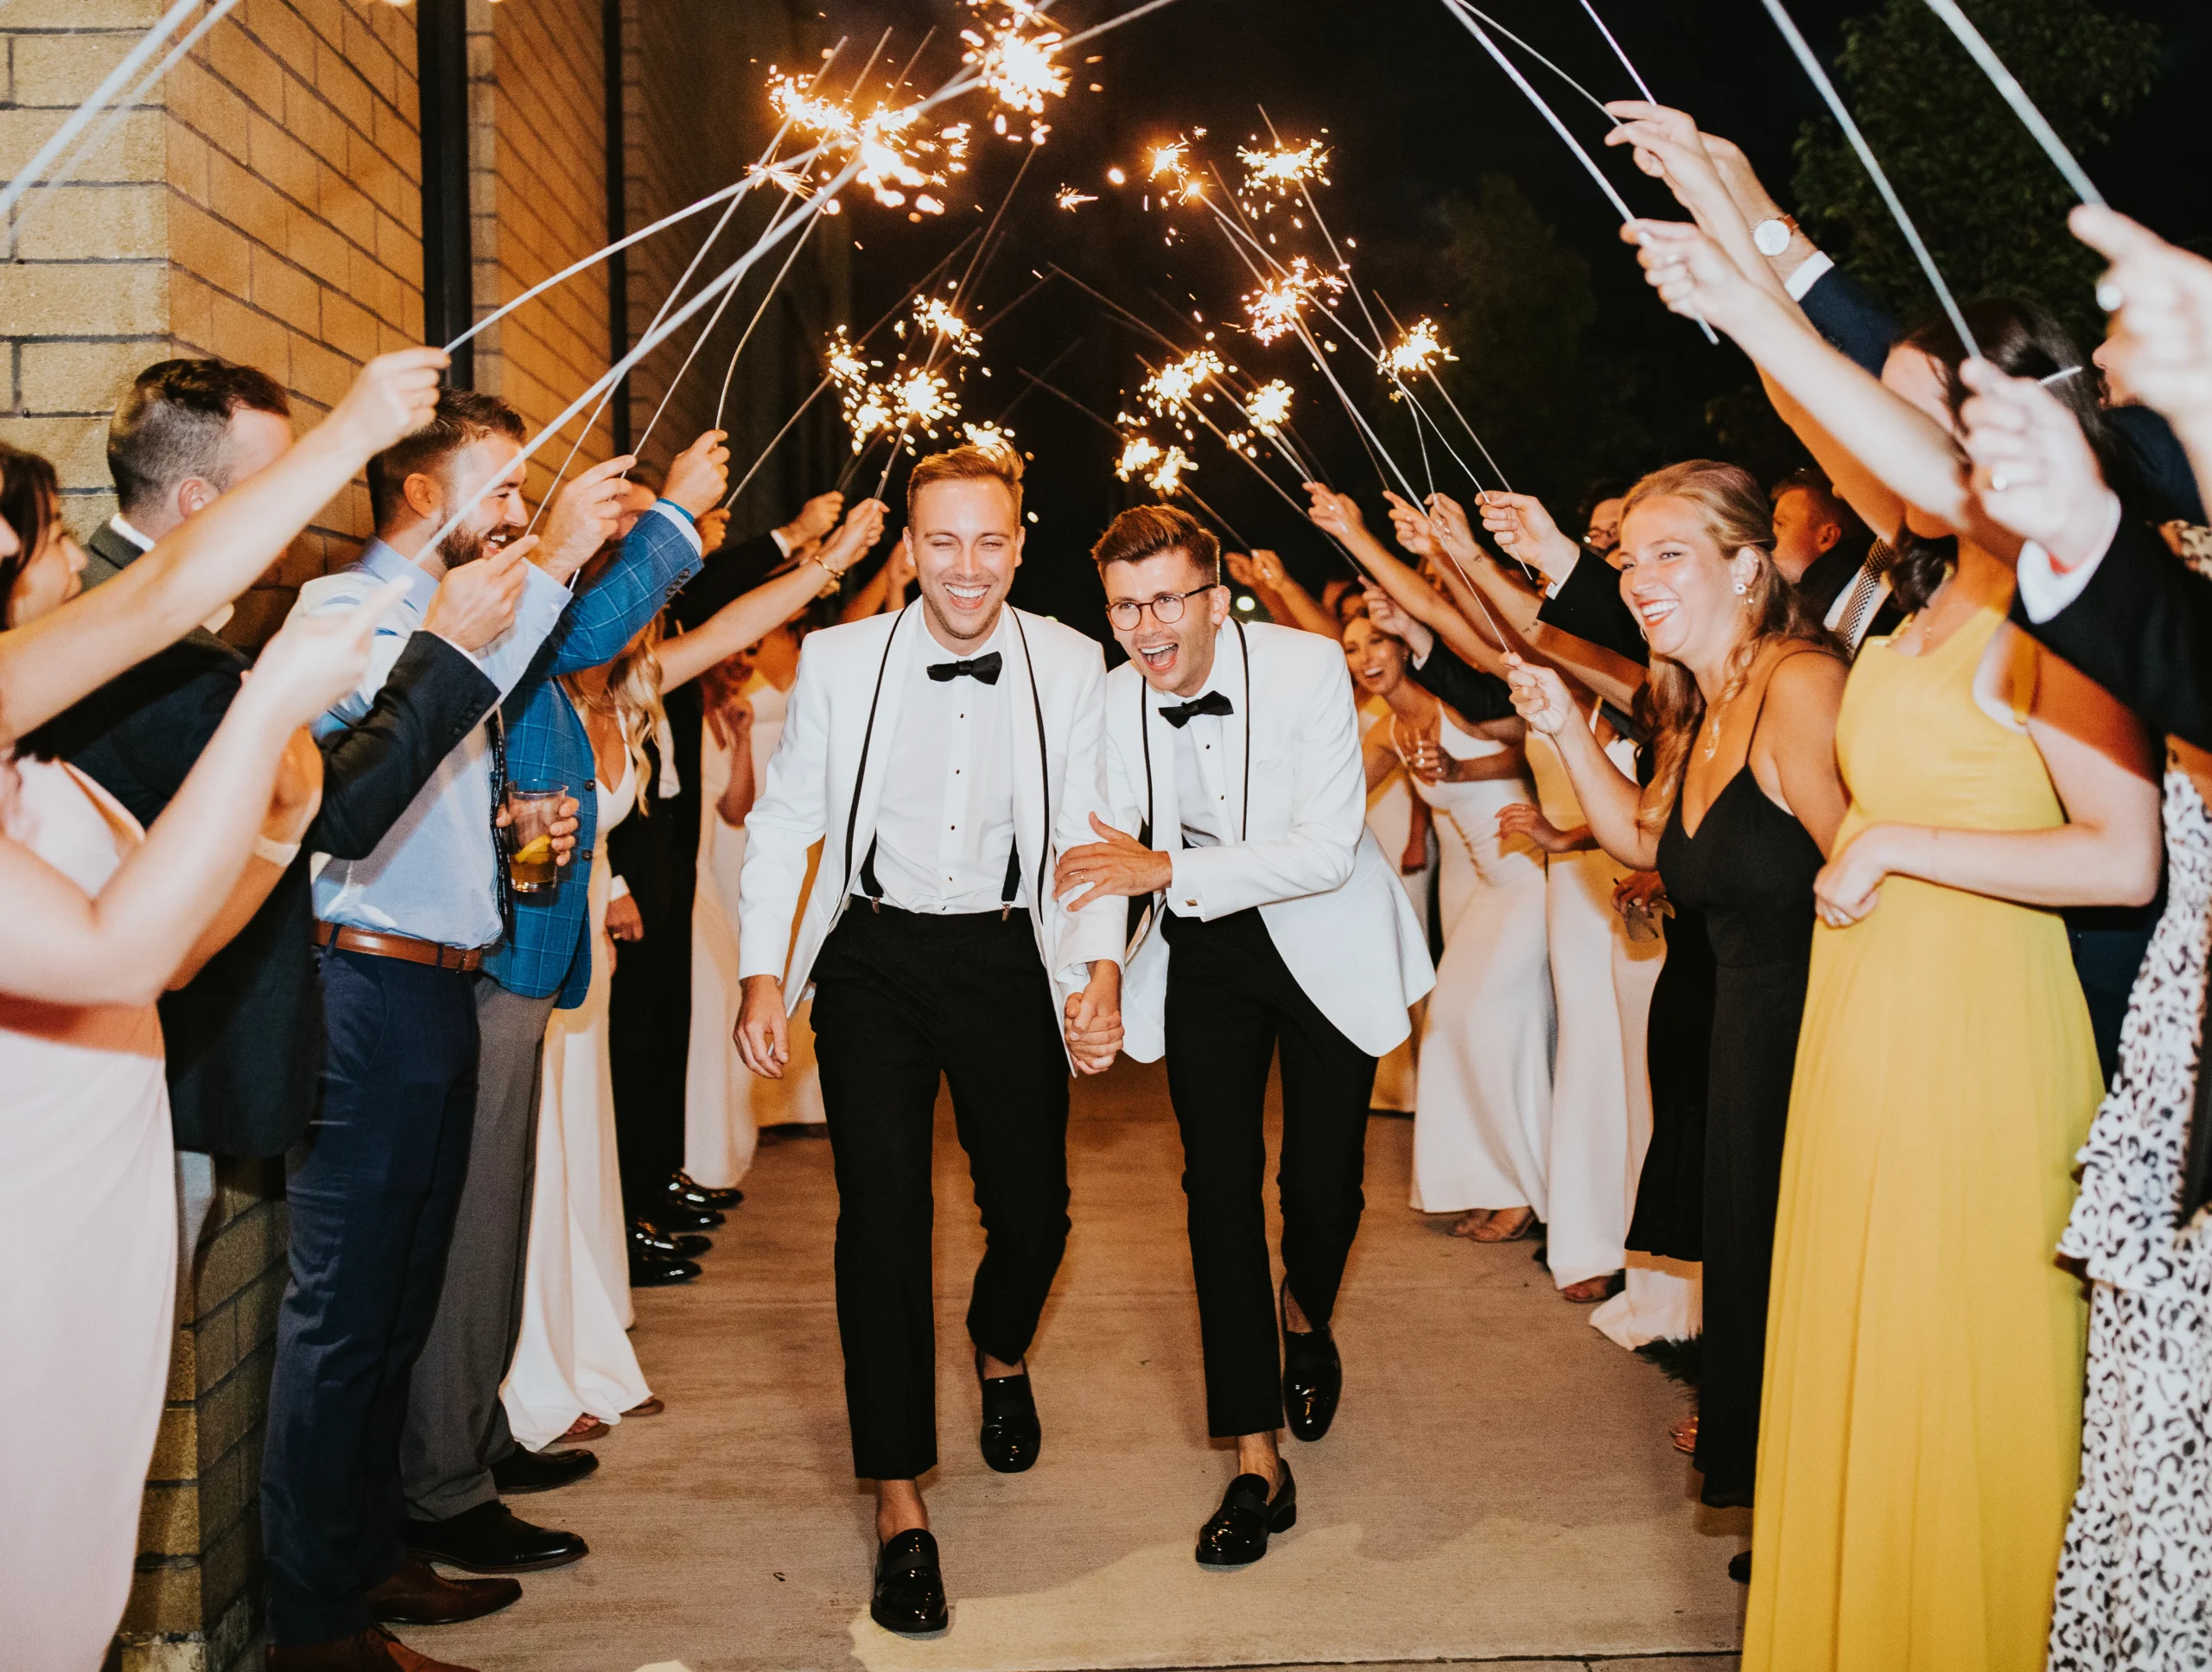 Byron and Kyle walking through a crowd holding up sparklers 